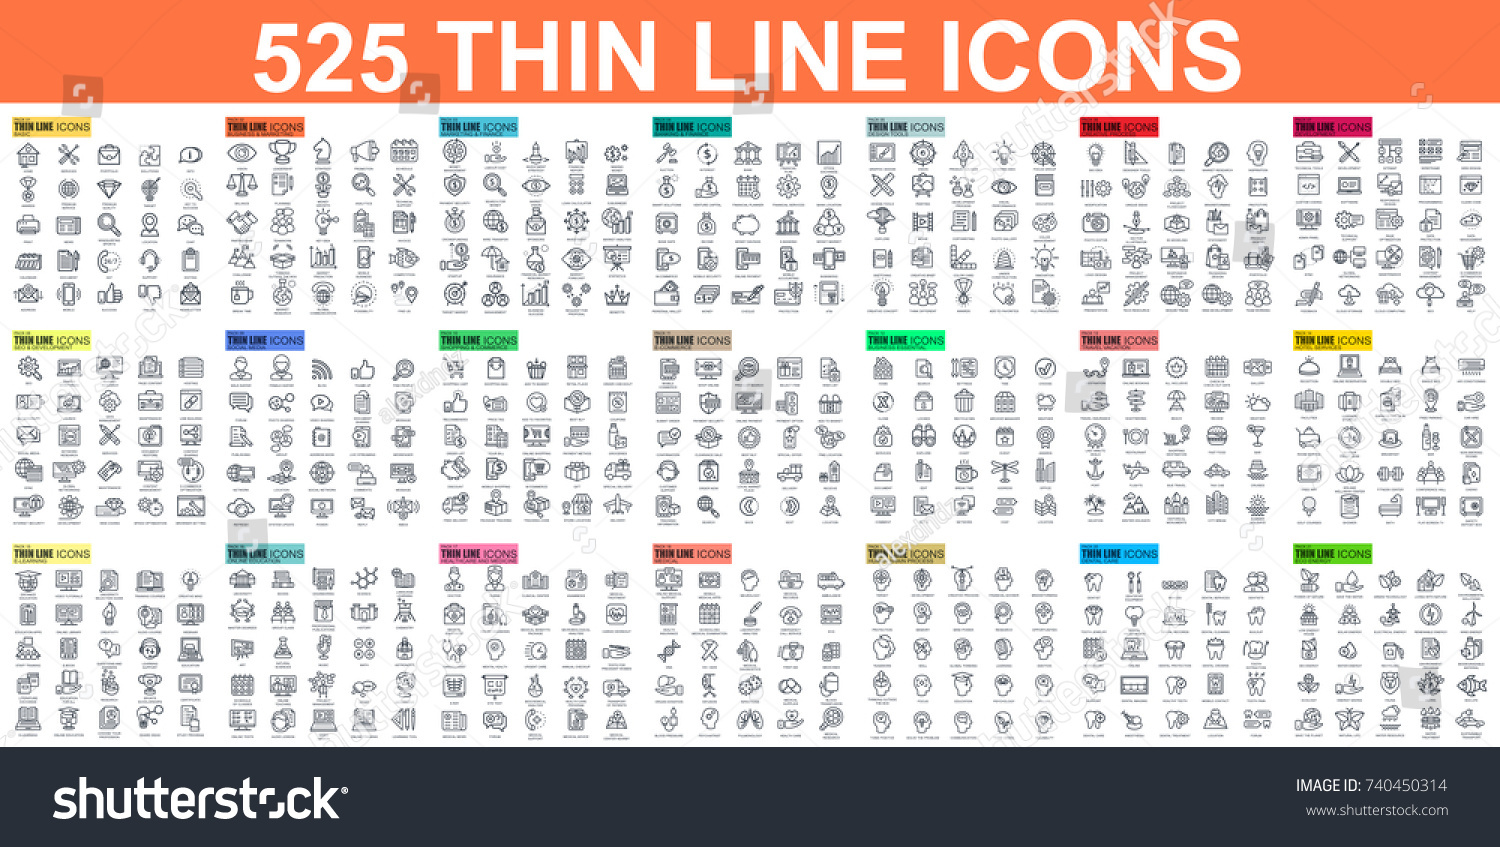 Simple set of vector thin line icons. Contains such Icons as Business, Marketing, Shopping, Banking, E-commerce, SEO, Technology, Medical, Education, Web Development, and more. Linear pictogram pack. #740450314